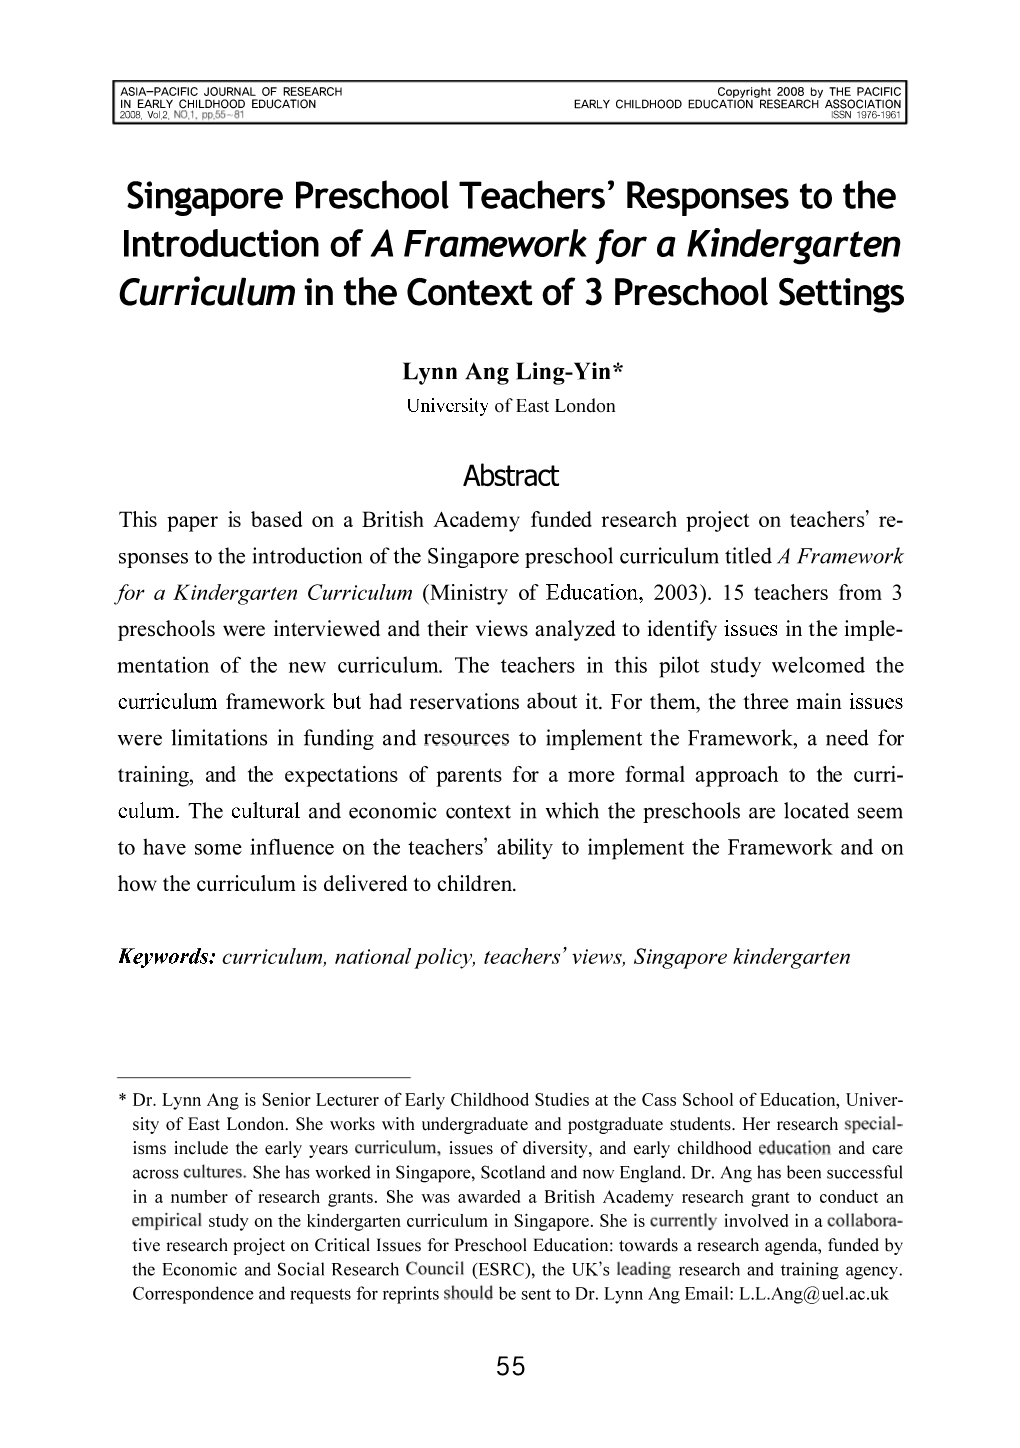 Singapore Preschool Teachers' Responses to the Introduction of a Framework for a Kindergarten Curriculum in the Context of 3 Preschool Settings